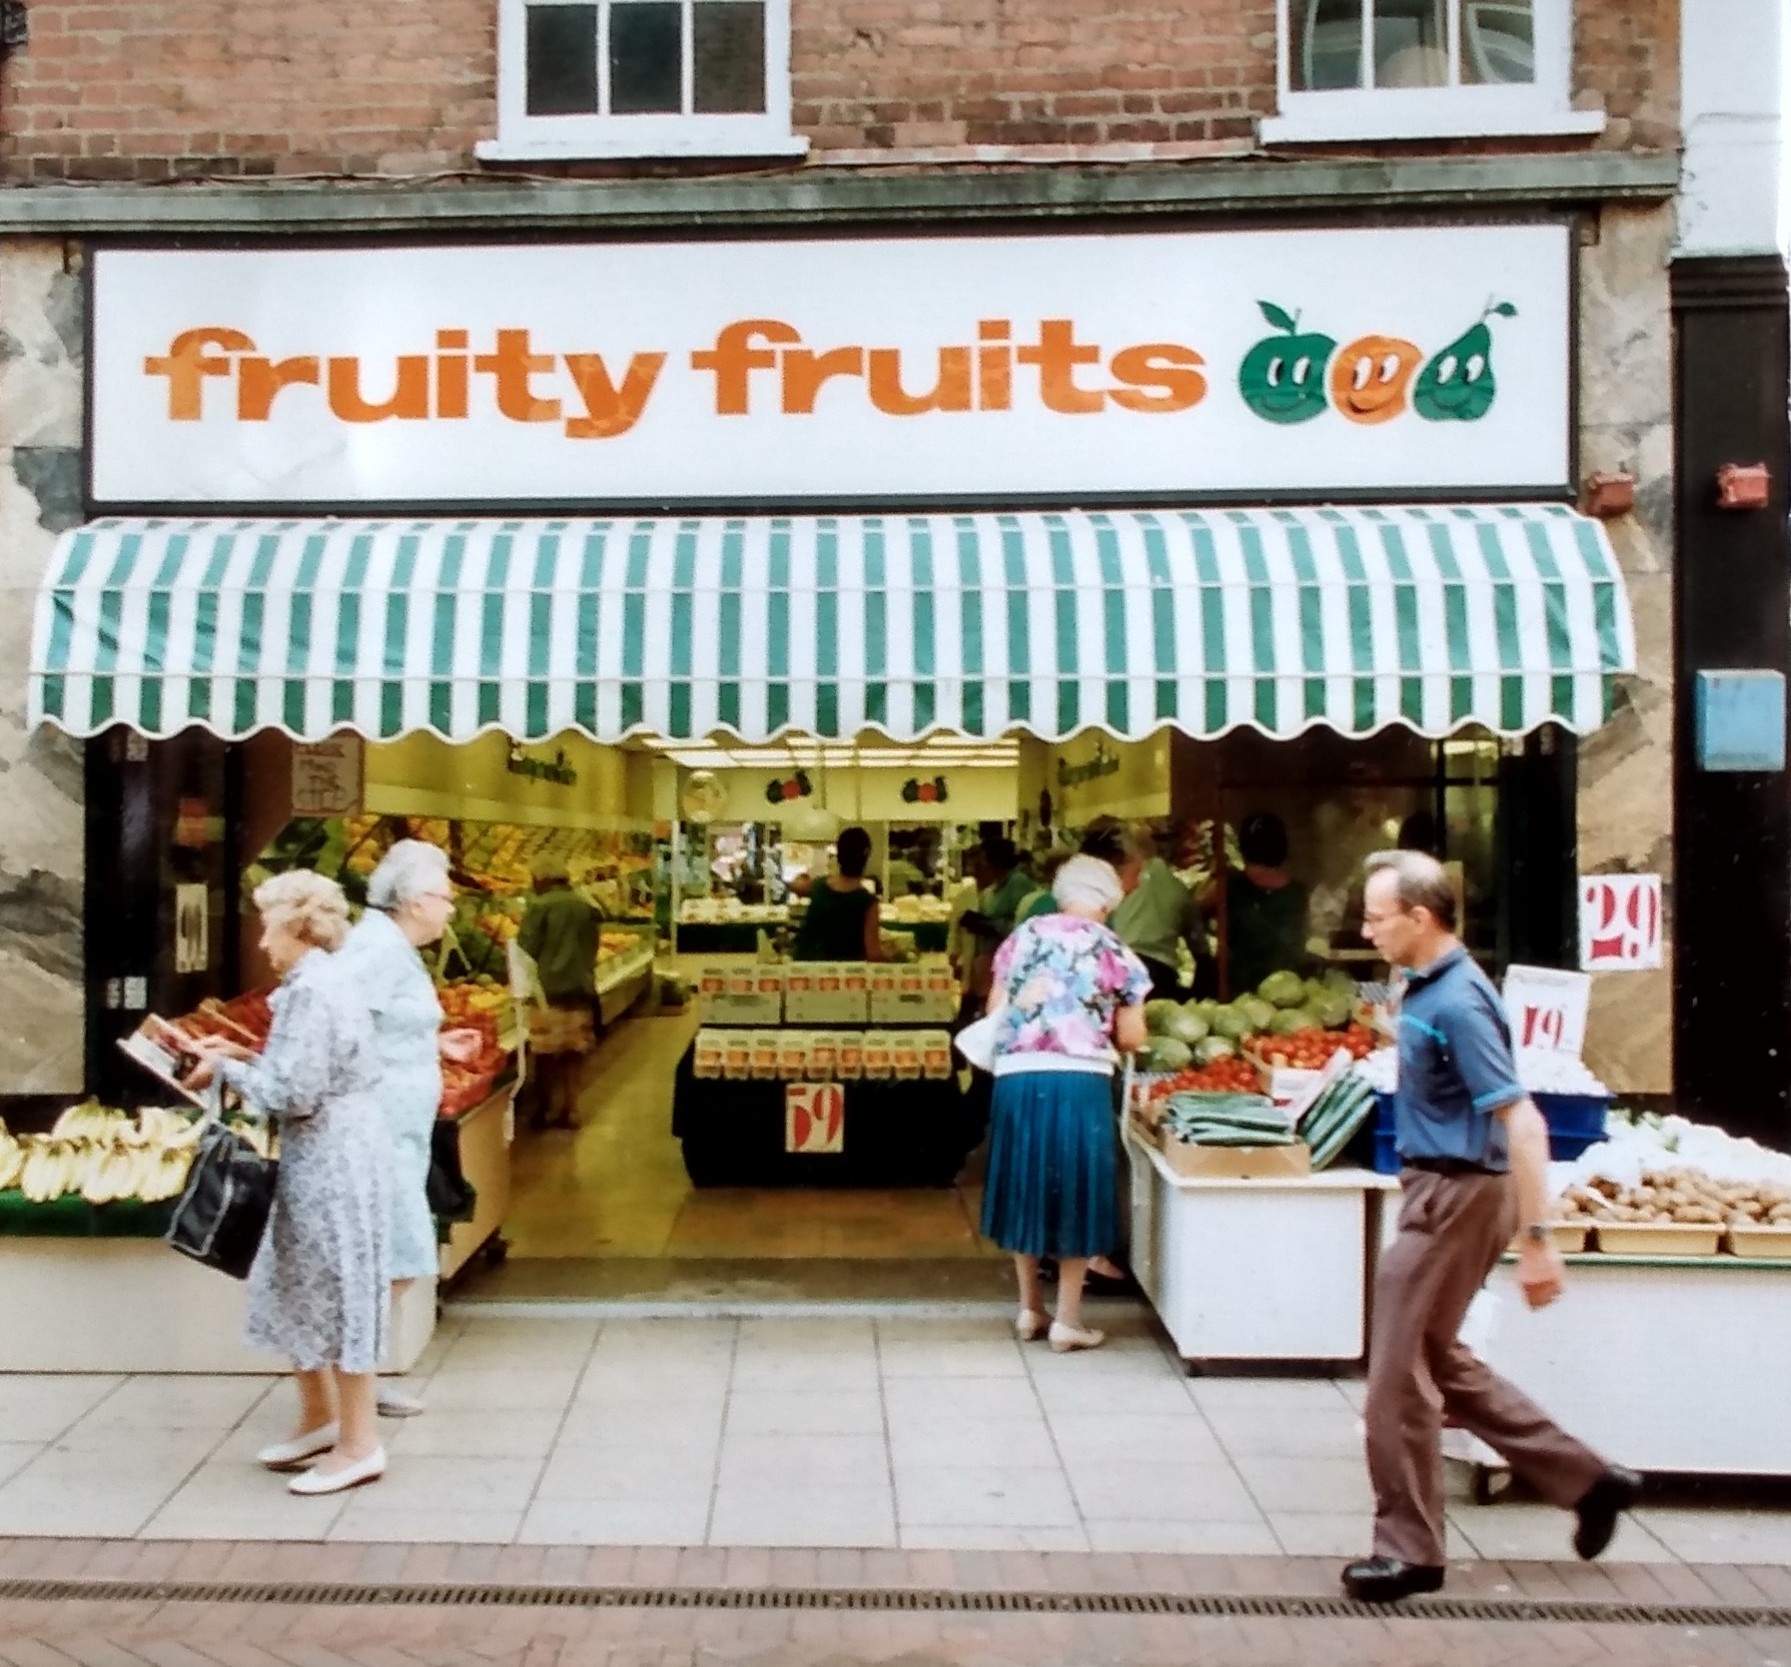 Fruity fruits was one of several fruit and veg stores in and around the city centre